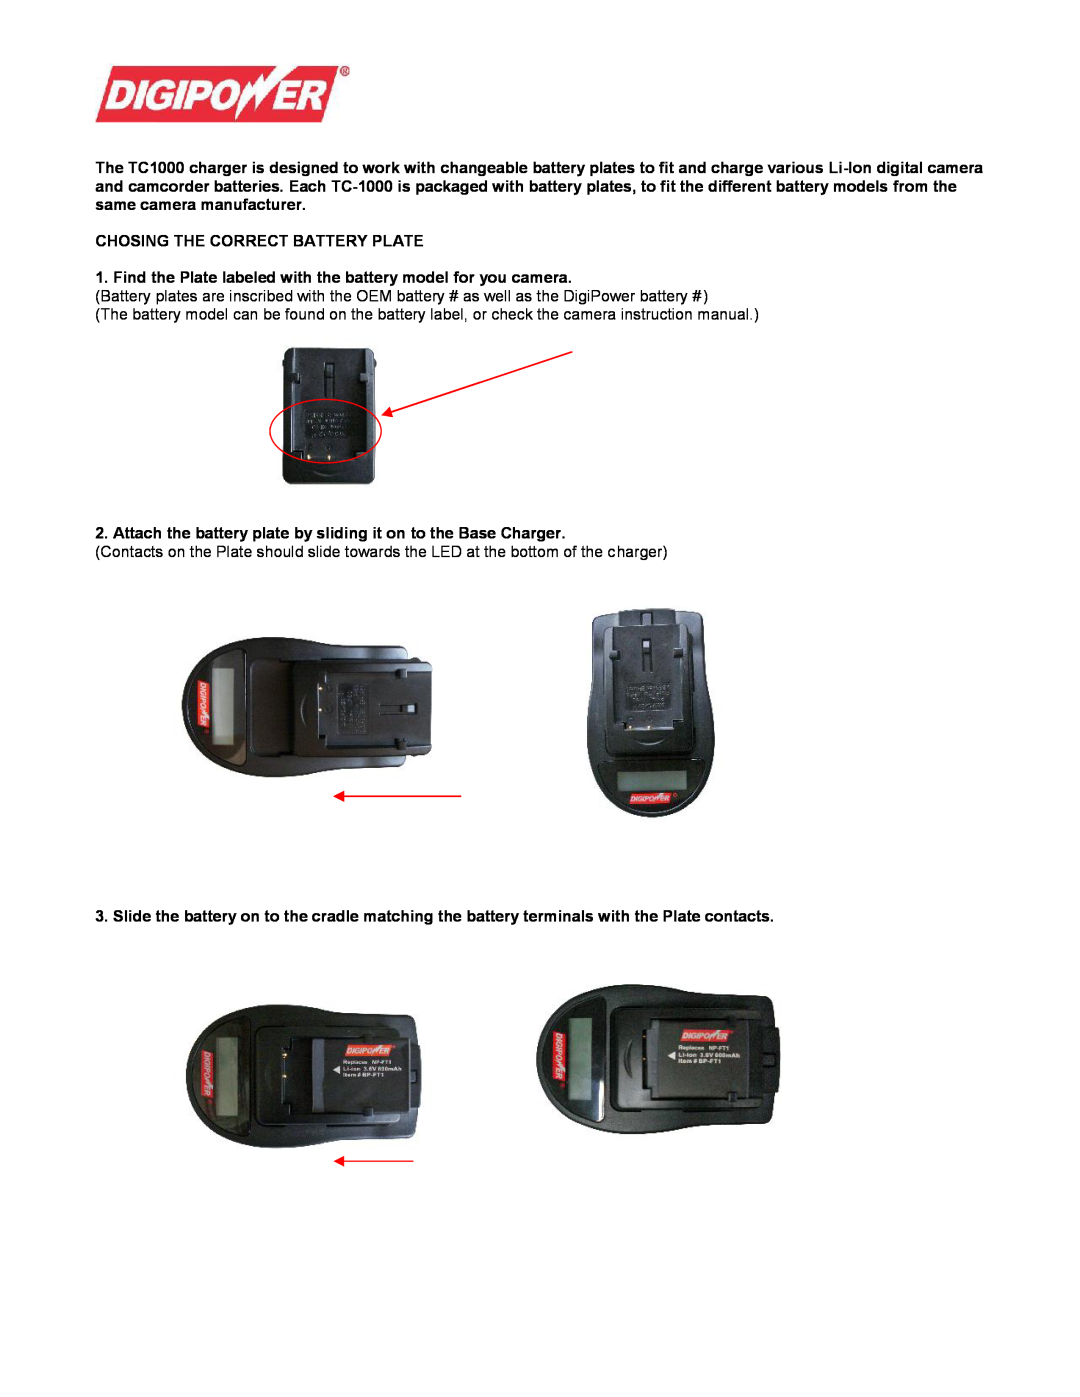 DigiPower RTC-1000, VTC-1000 operating instructions Chosing The Correct Battery Plate 